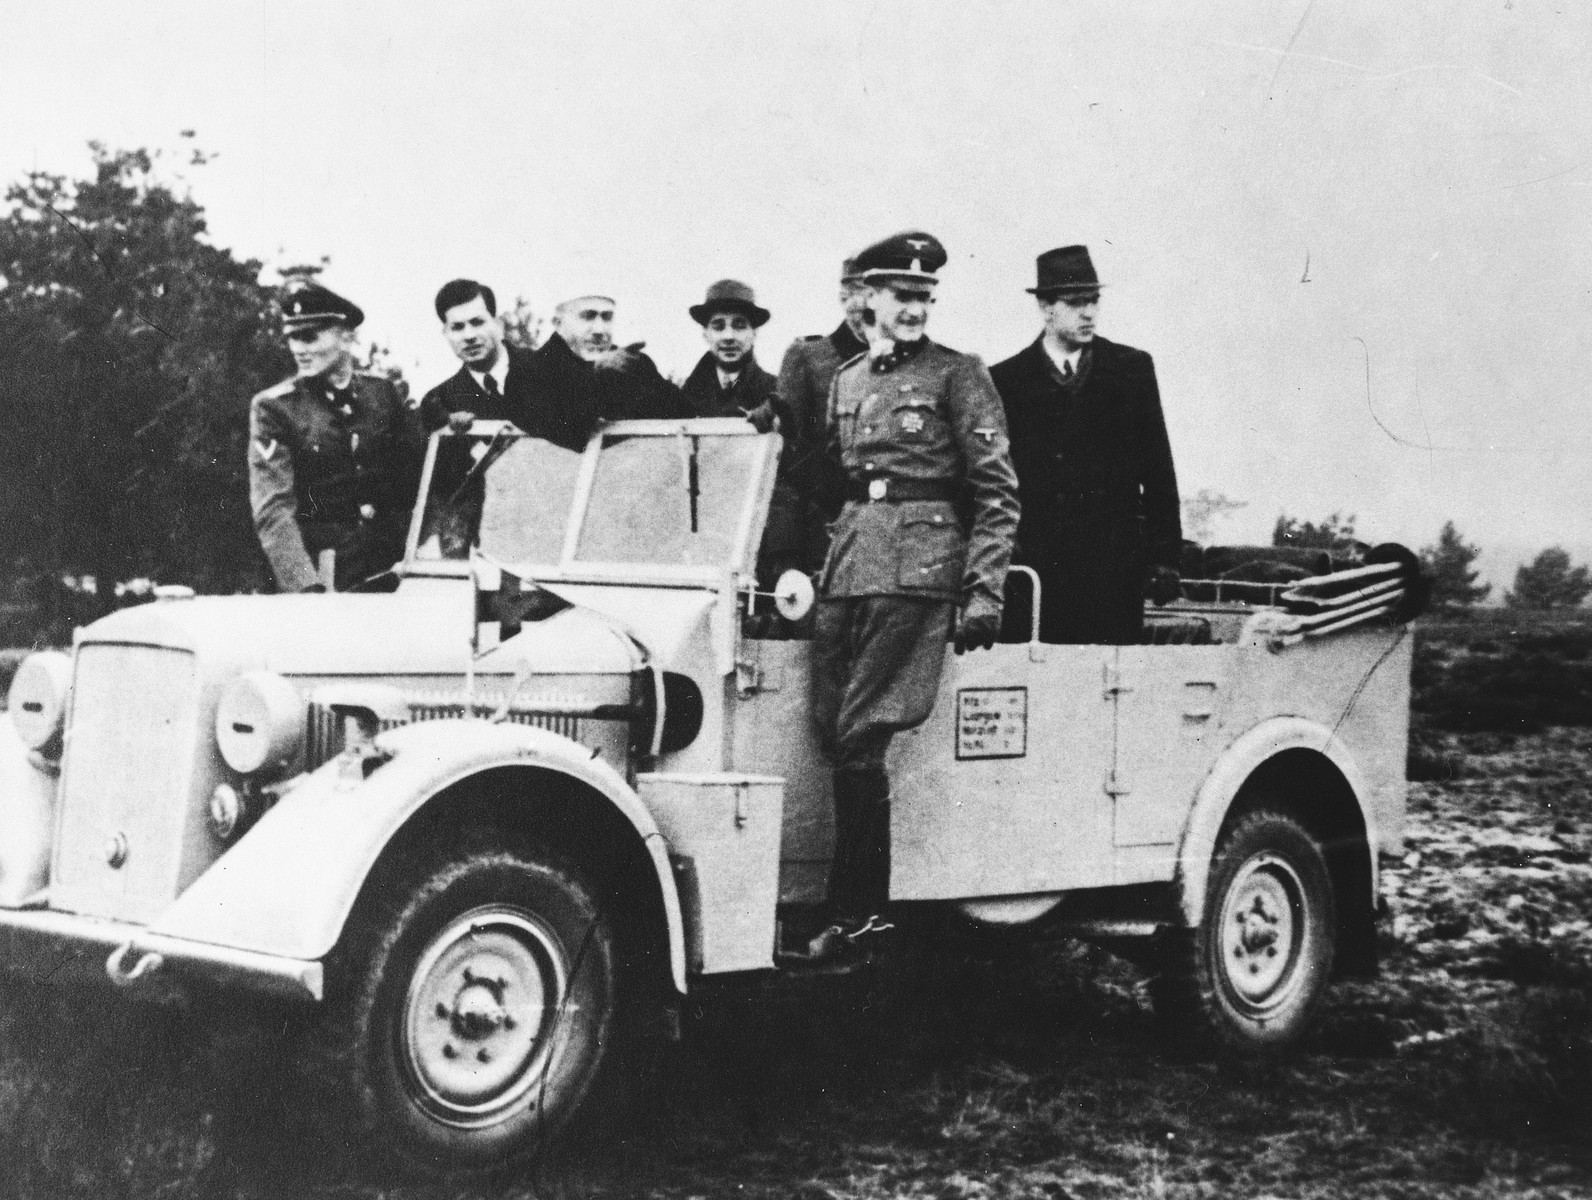 Hajj Amin al-Husayni rides in an open jeep in the company of German SS and civilian officials during an official visit to Bosnia.